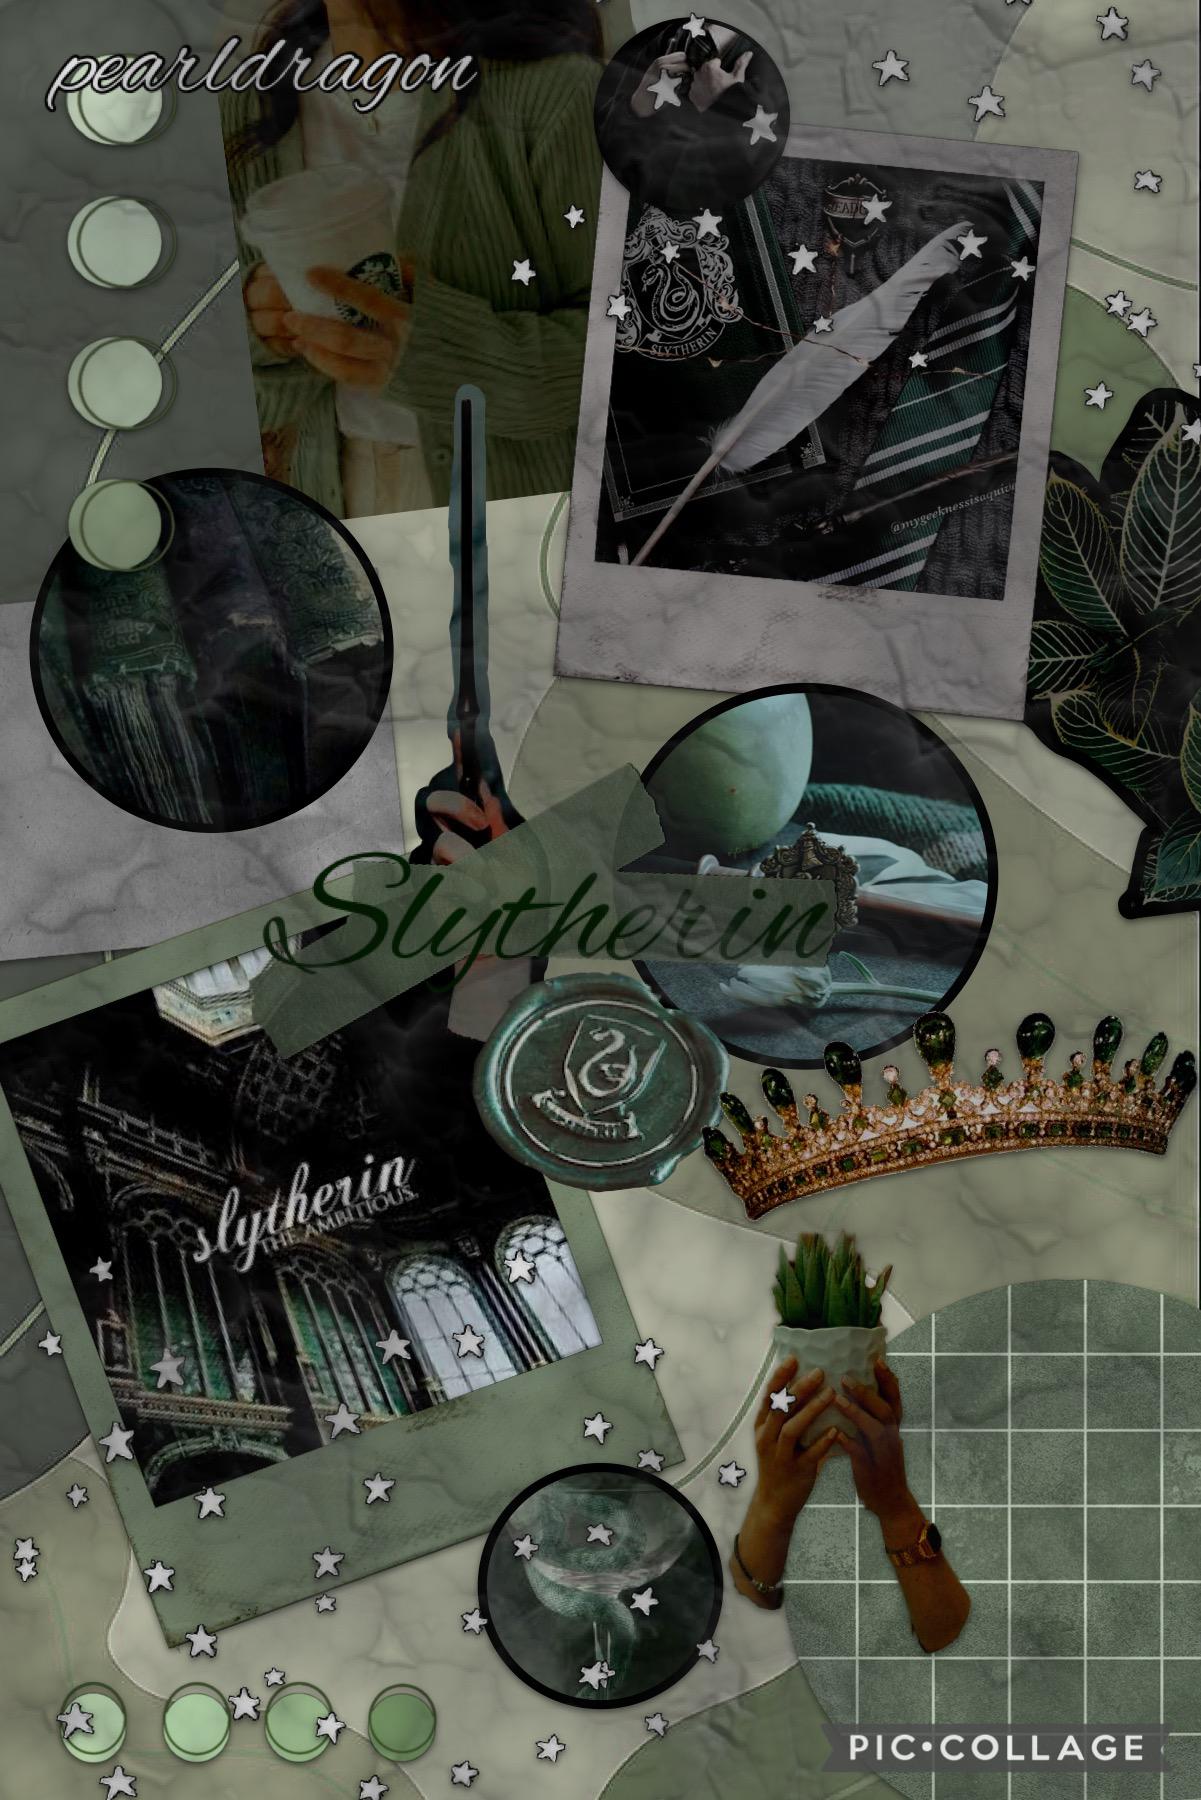 🐍tap🐍
Slytherin!!! 🪄🖤💚
(It’s from Harry Potter)
💚🖤💚🖤💚🖤🐍🪄🪄